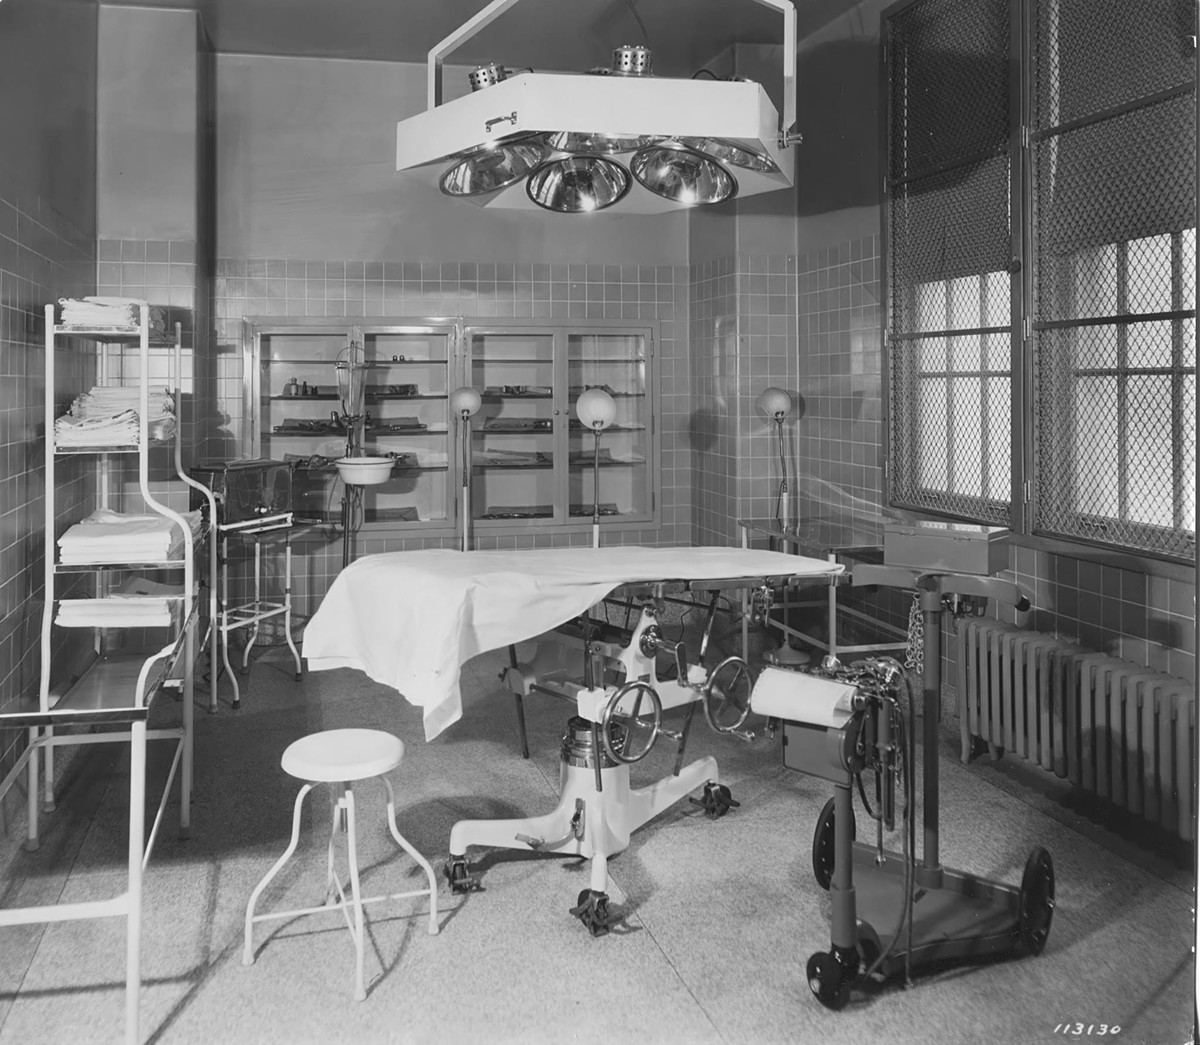 A state of the art operating room at Eloise when it was built in 1925.